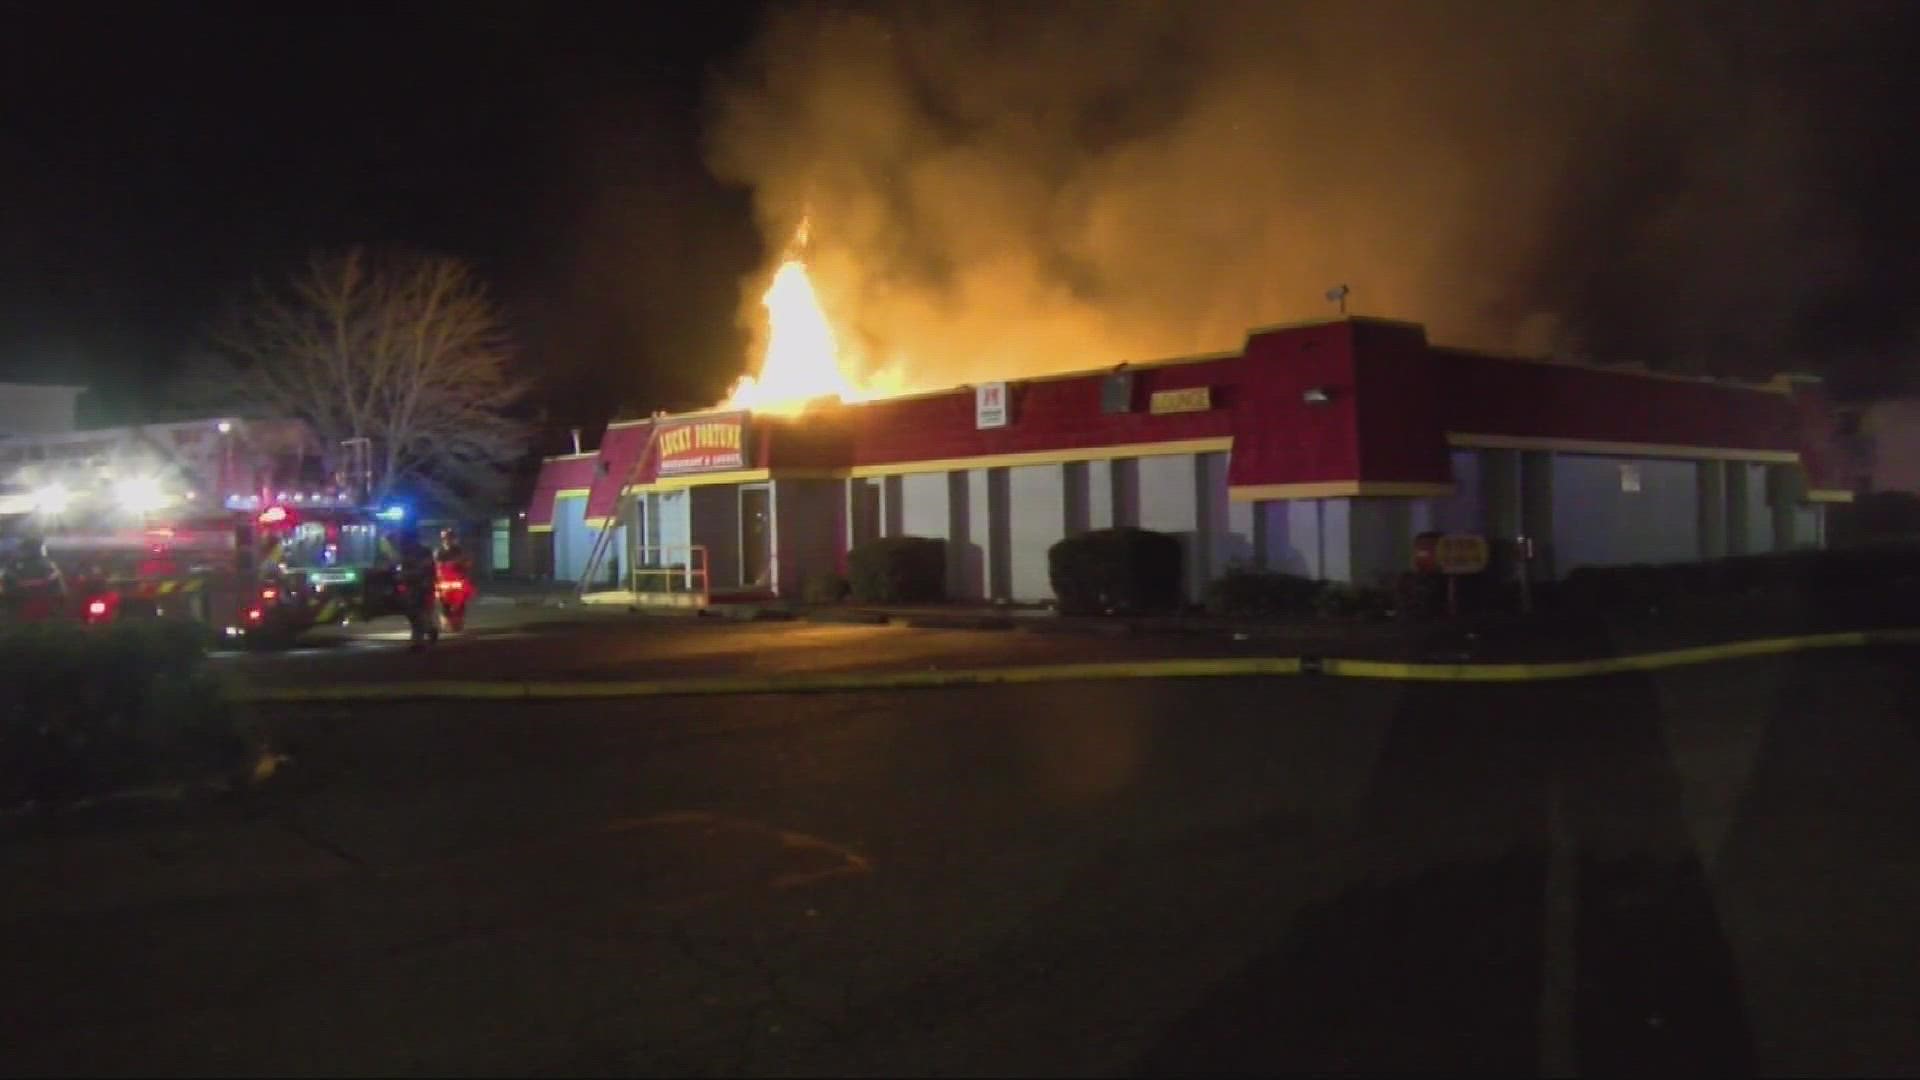 Police said the fire at the Lucky Fortune Restaurant early Sunday morning was one of three fires set in the same Salem area by the same person.